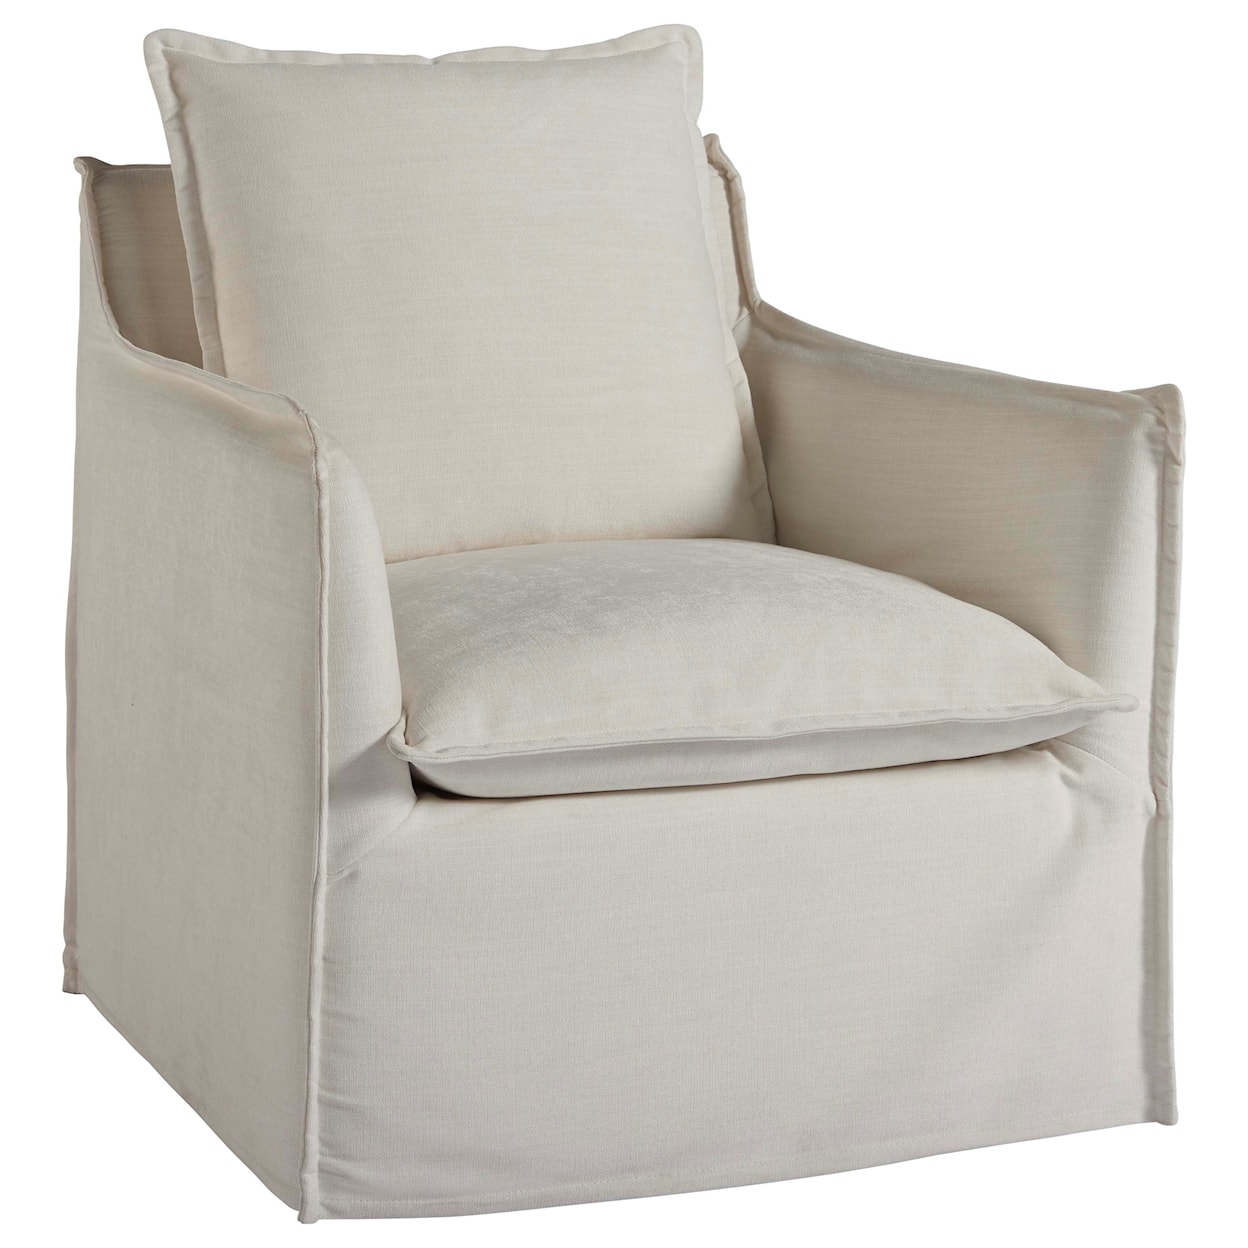 Universal Escape-Coastal Living Home Collection Swivel Chair